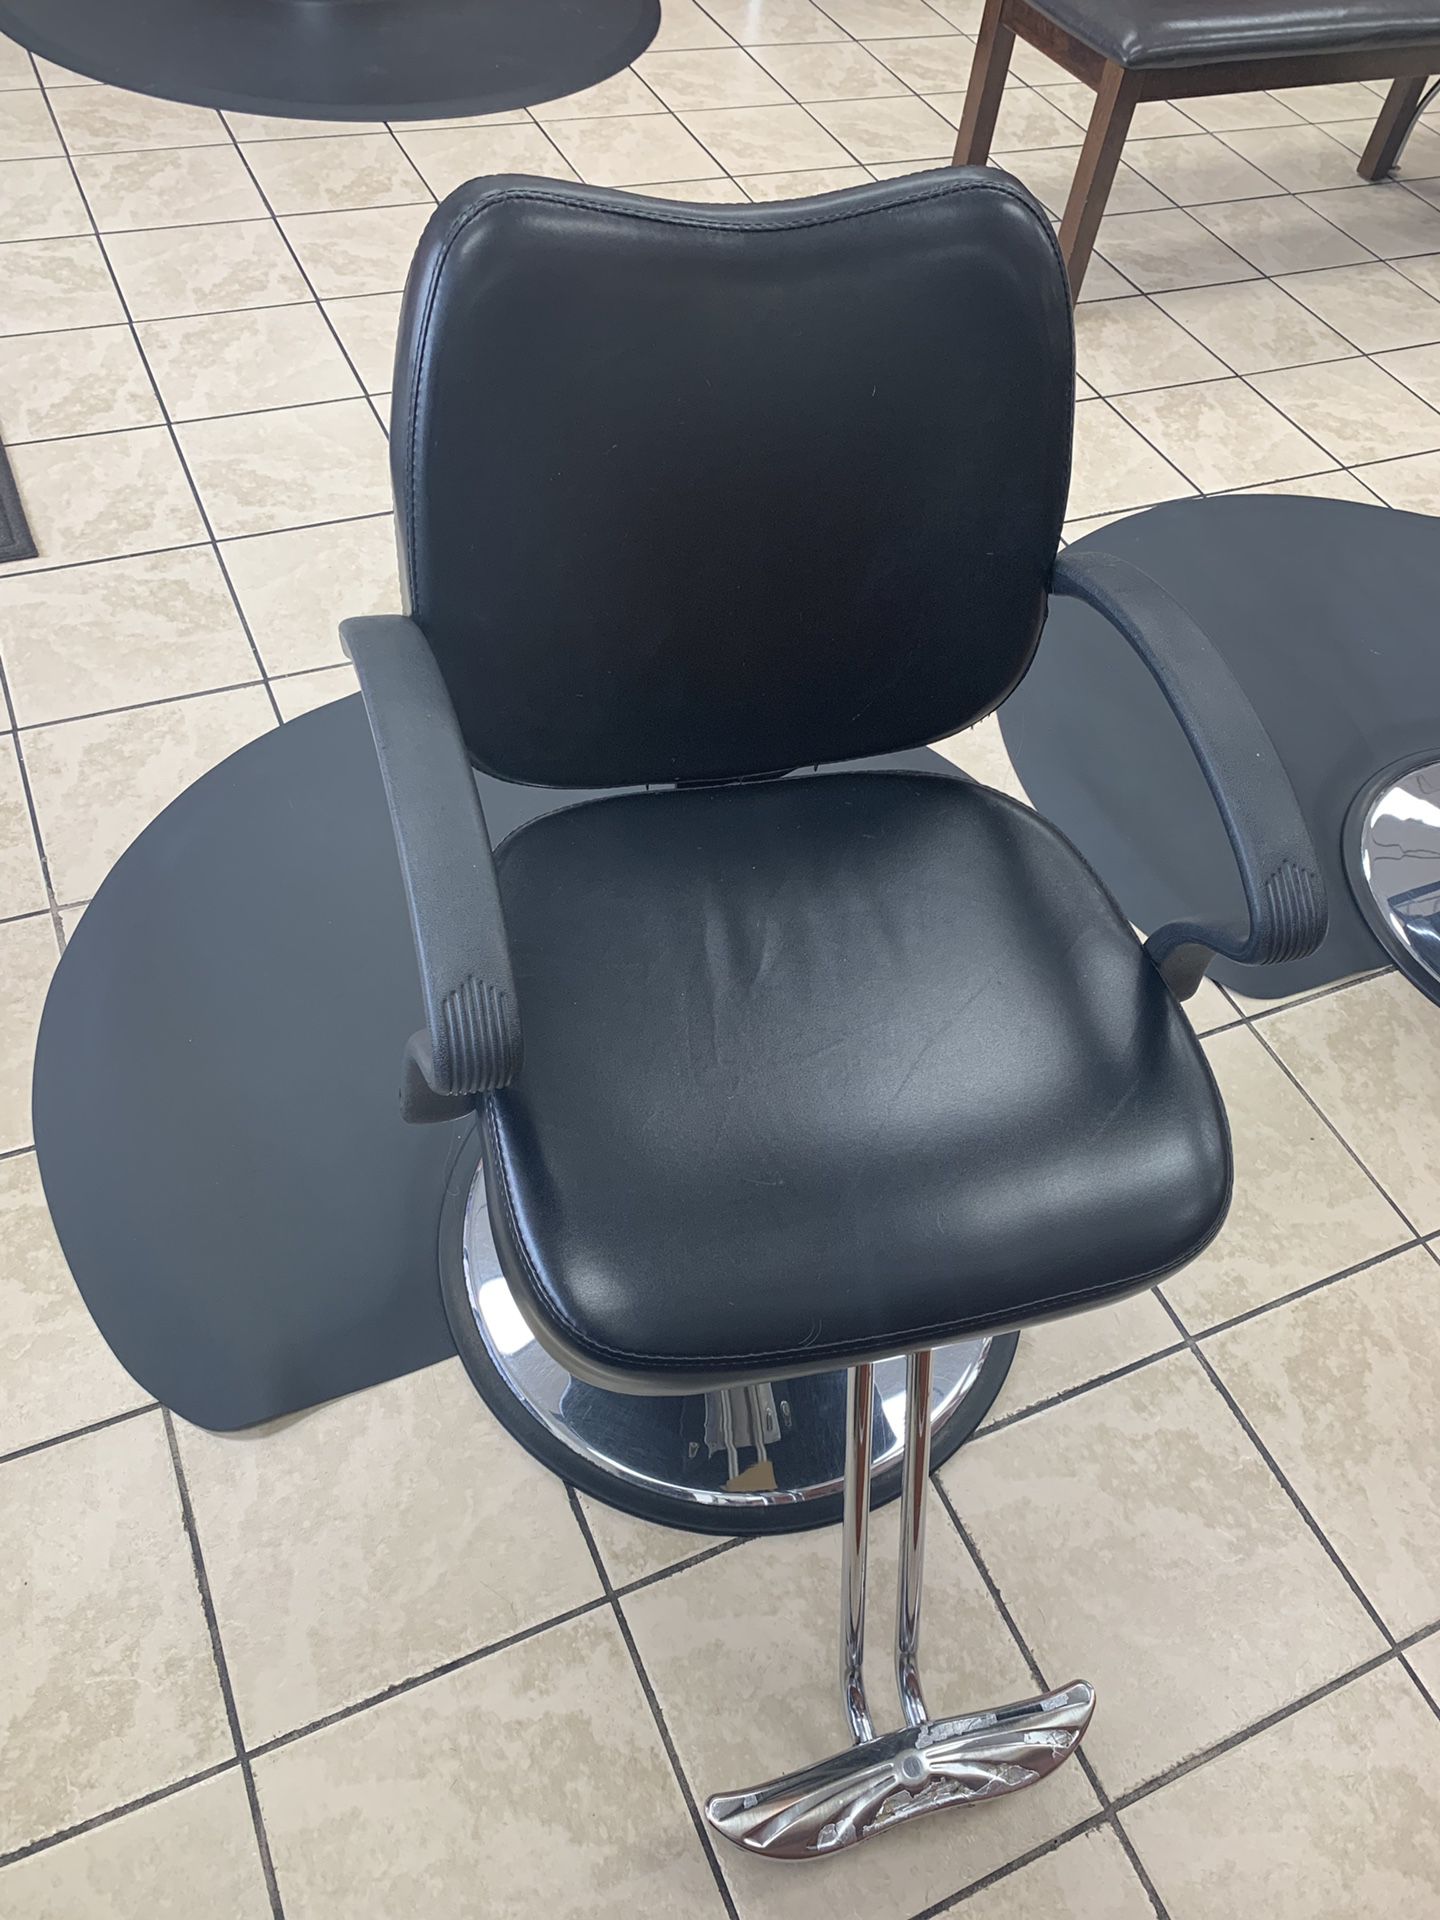 Chairs for barbers and beauty salon